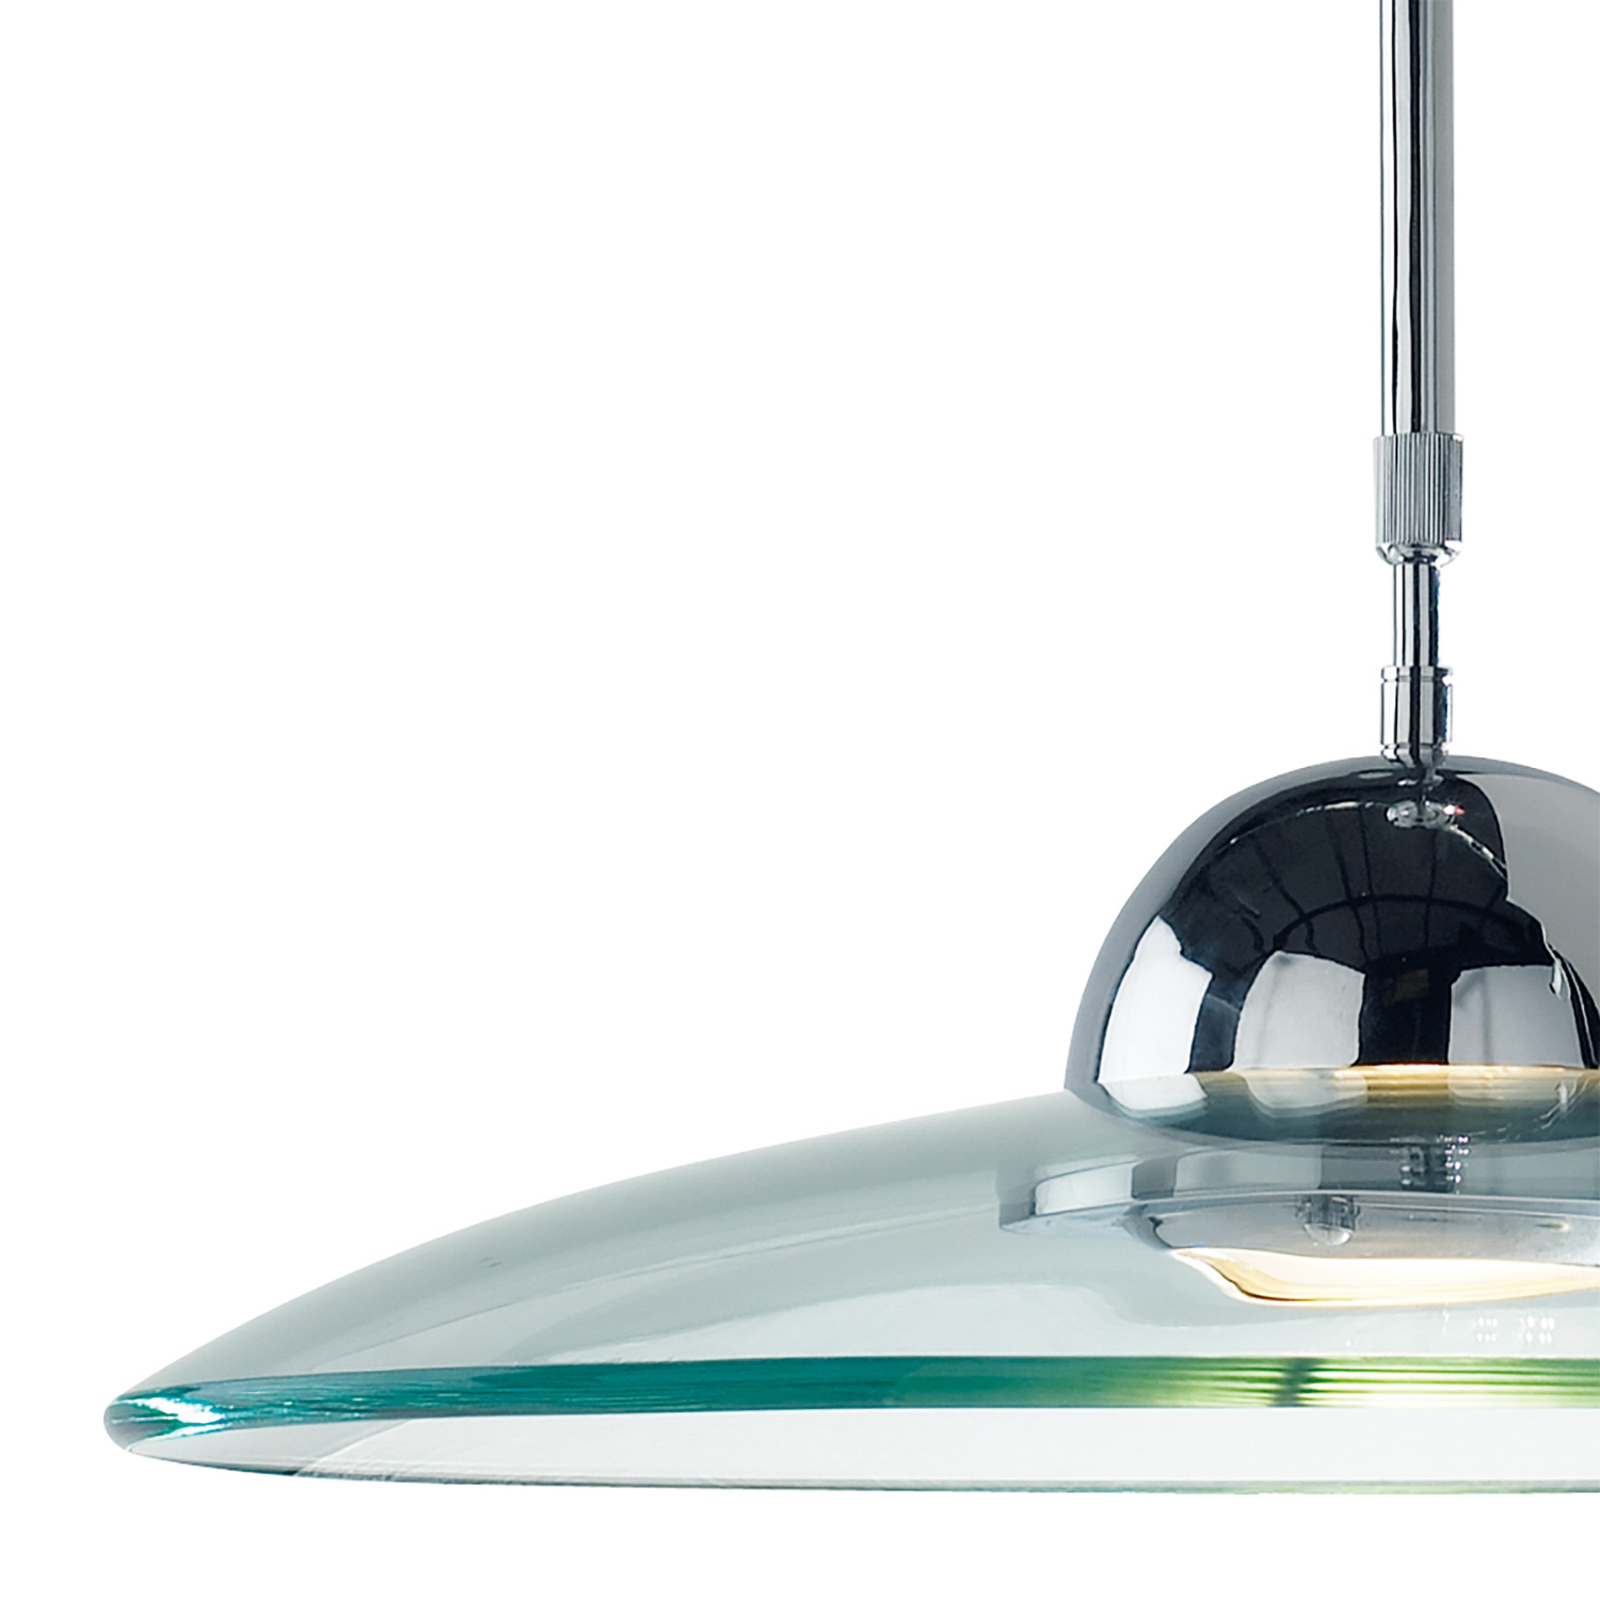 Hemisphere pendant light with clear glass shade